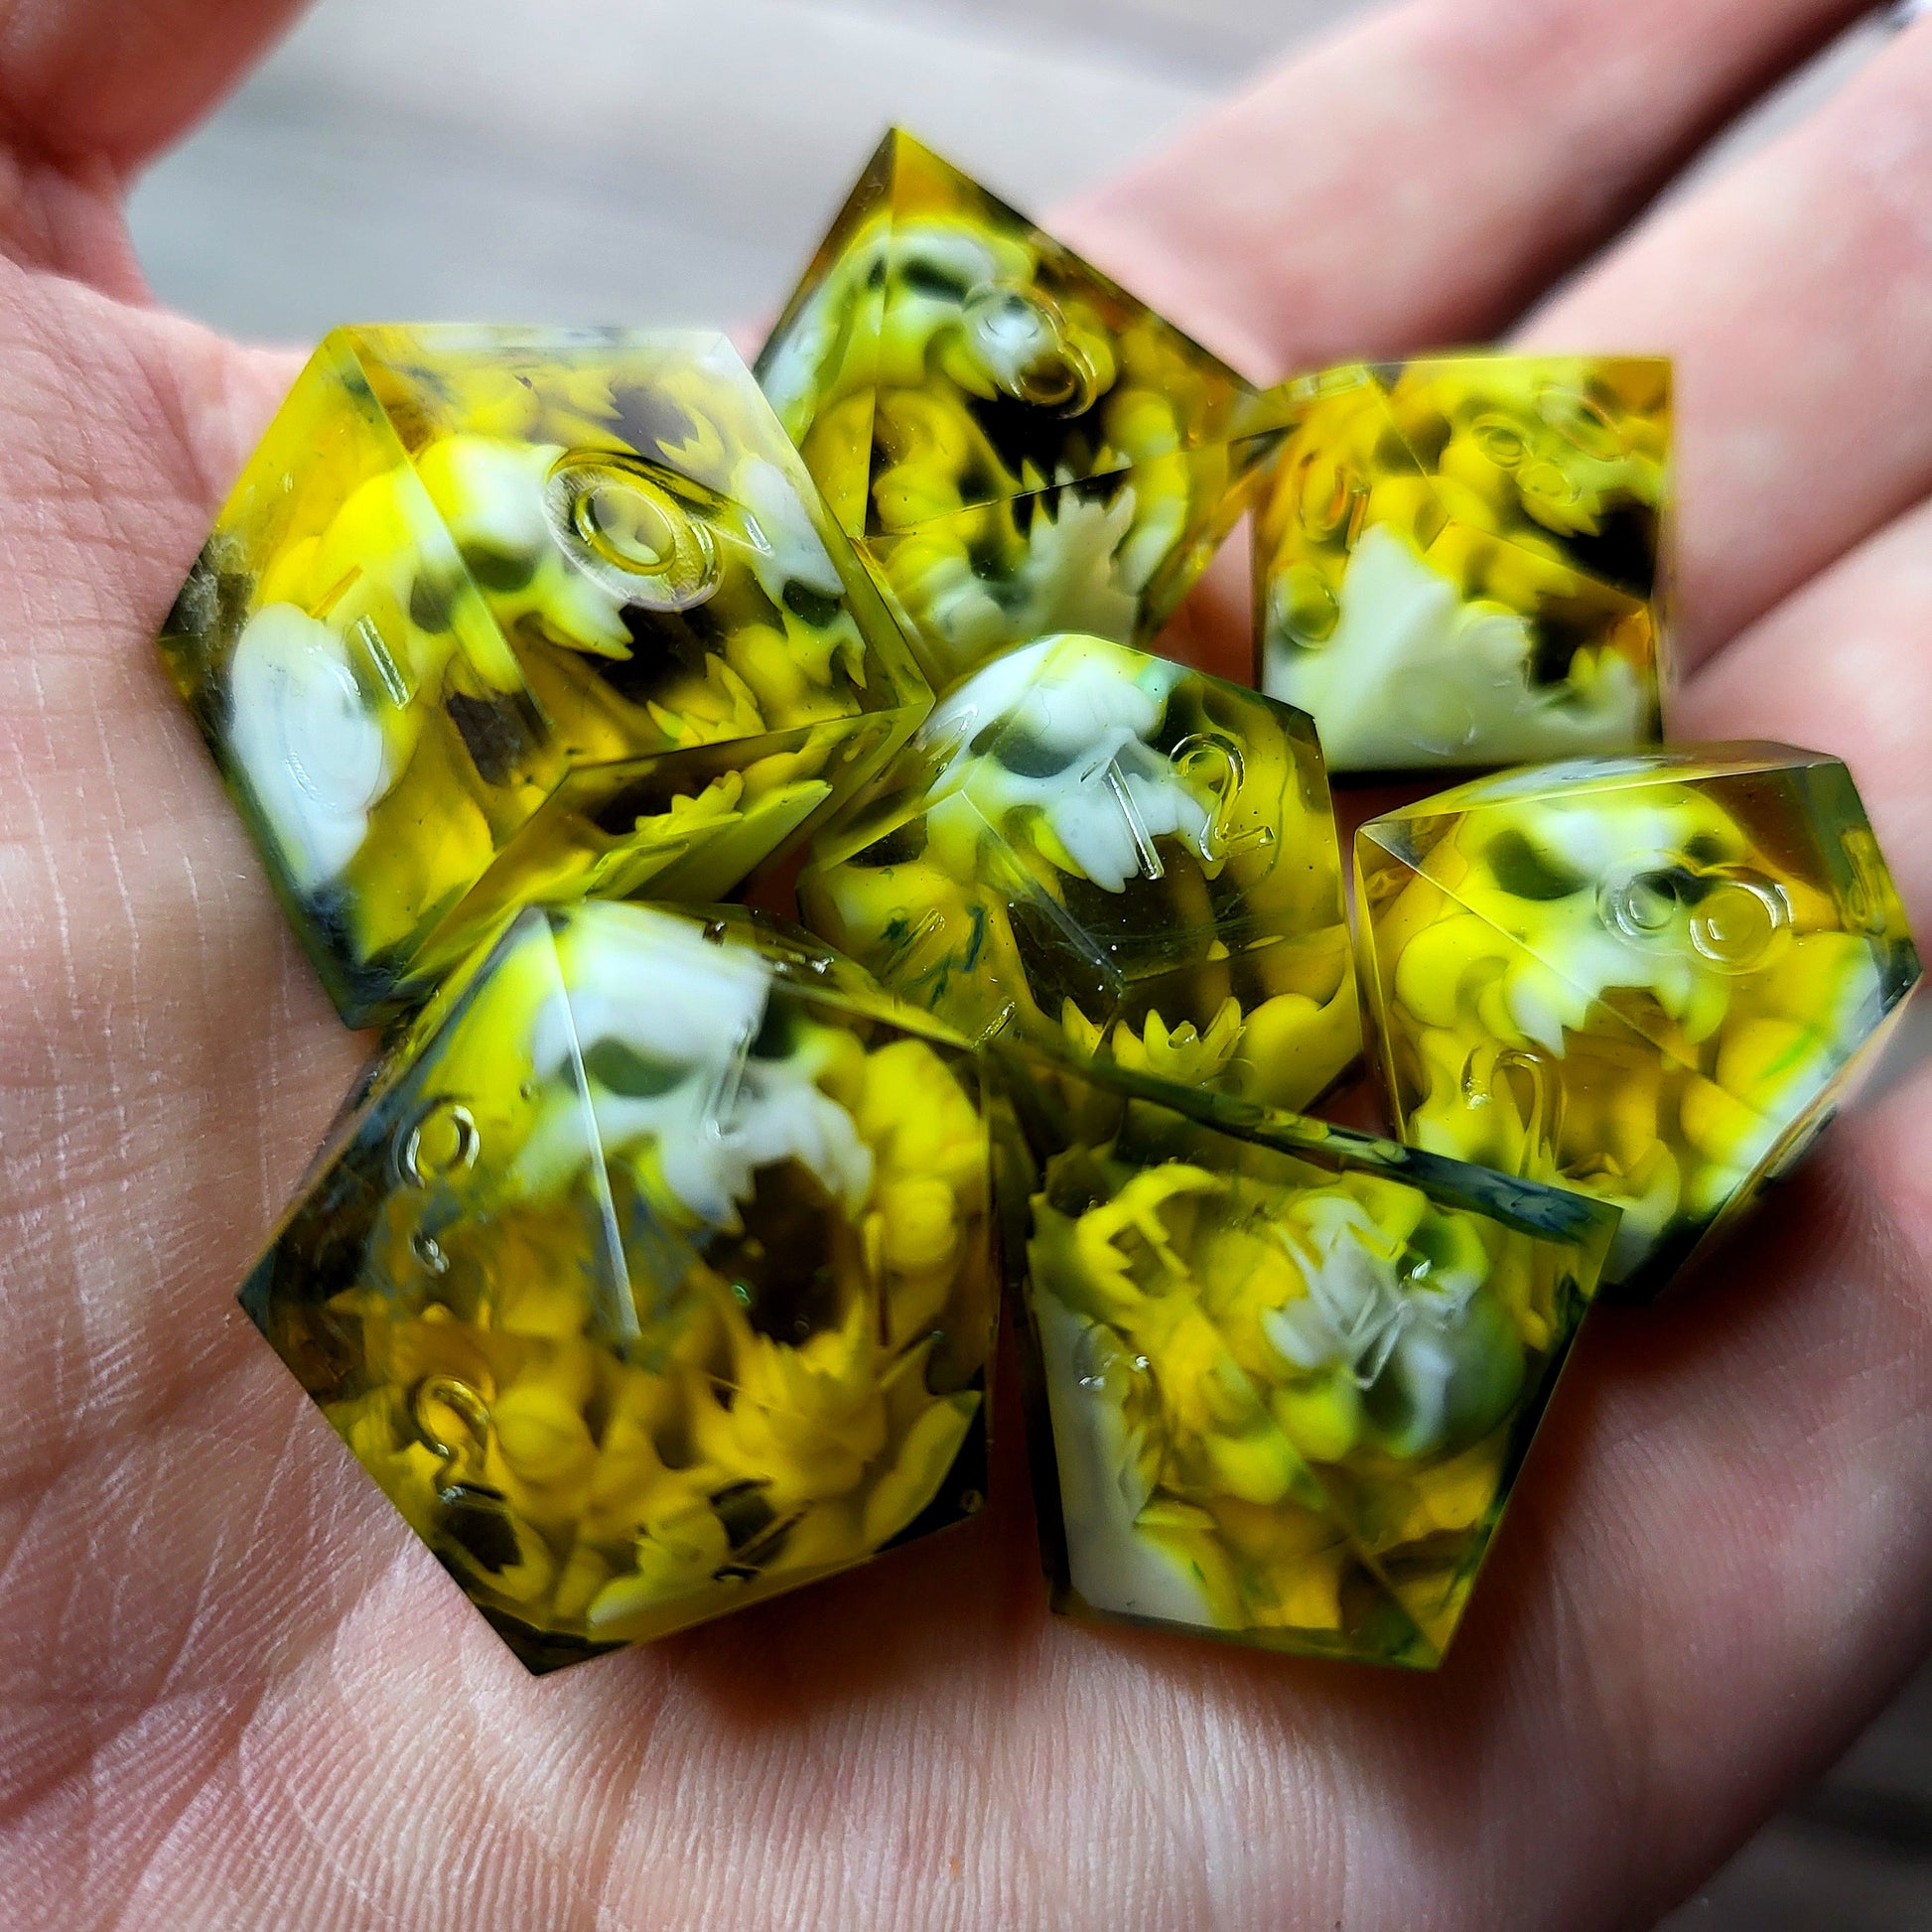 Dice set for role playing for Dungeons and Dragons